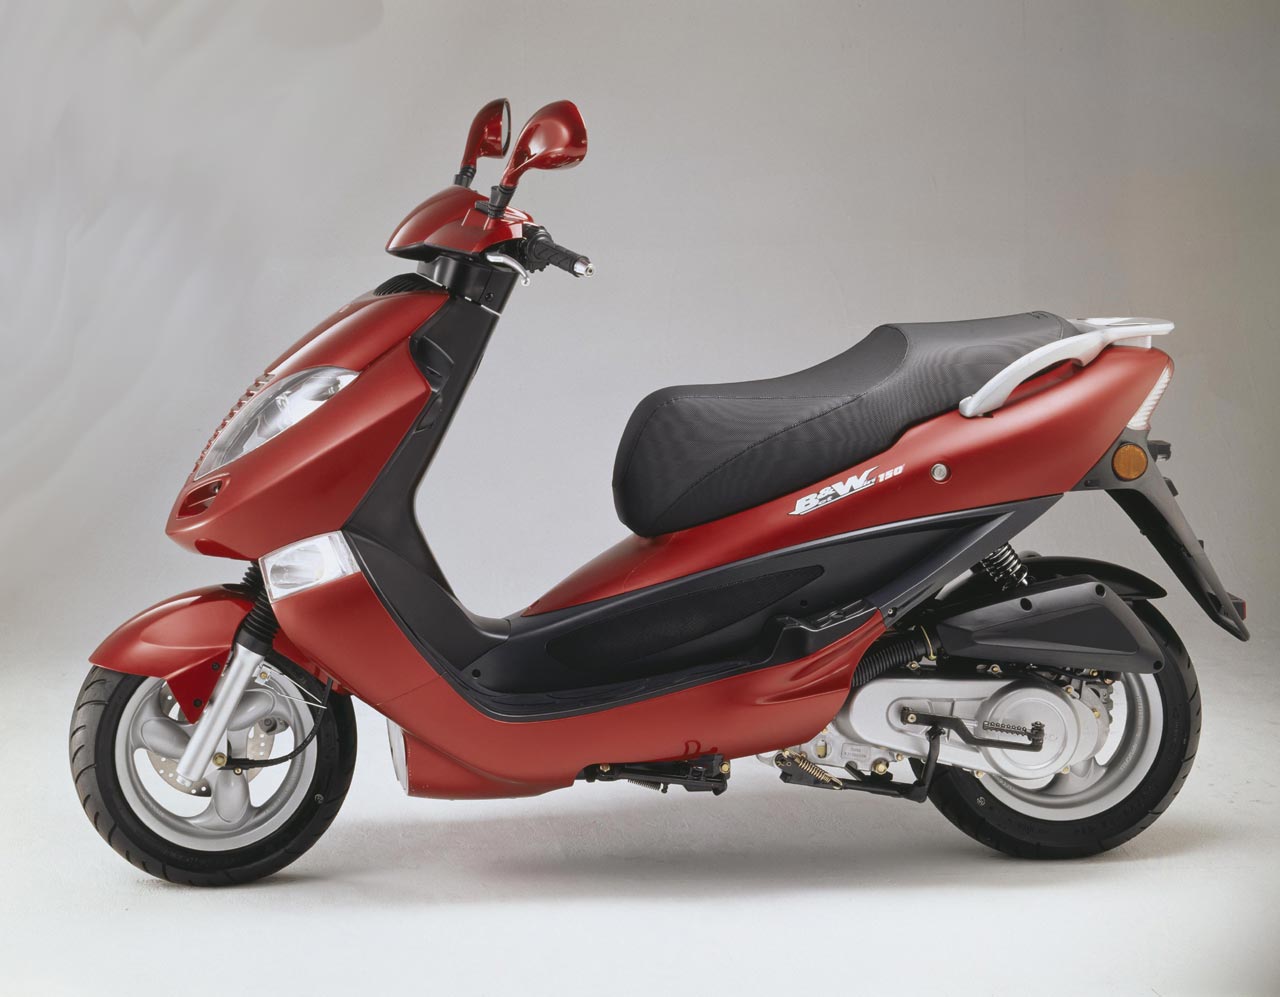 kymco bet and win 150-pic. 3